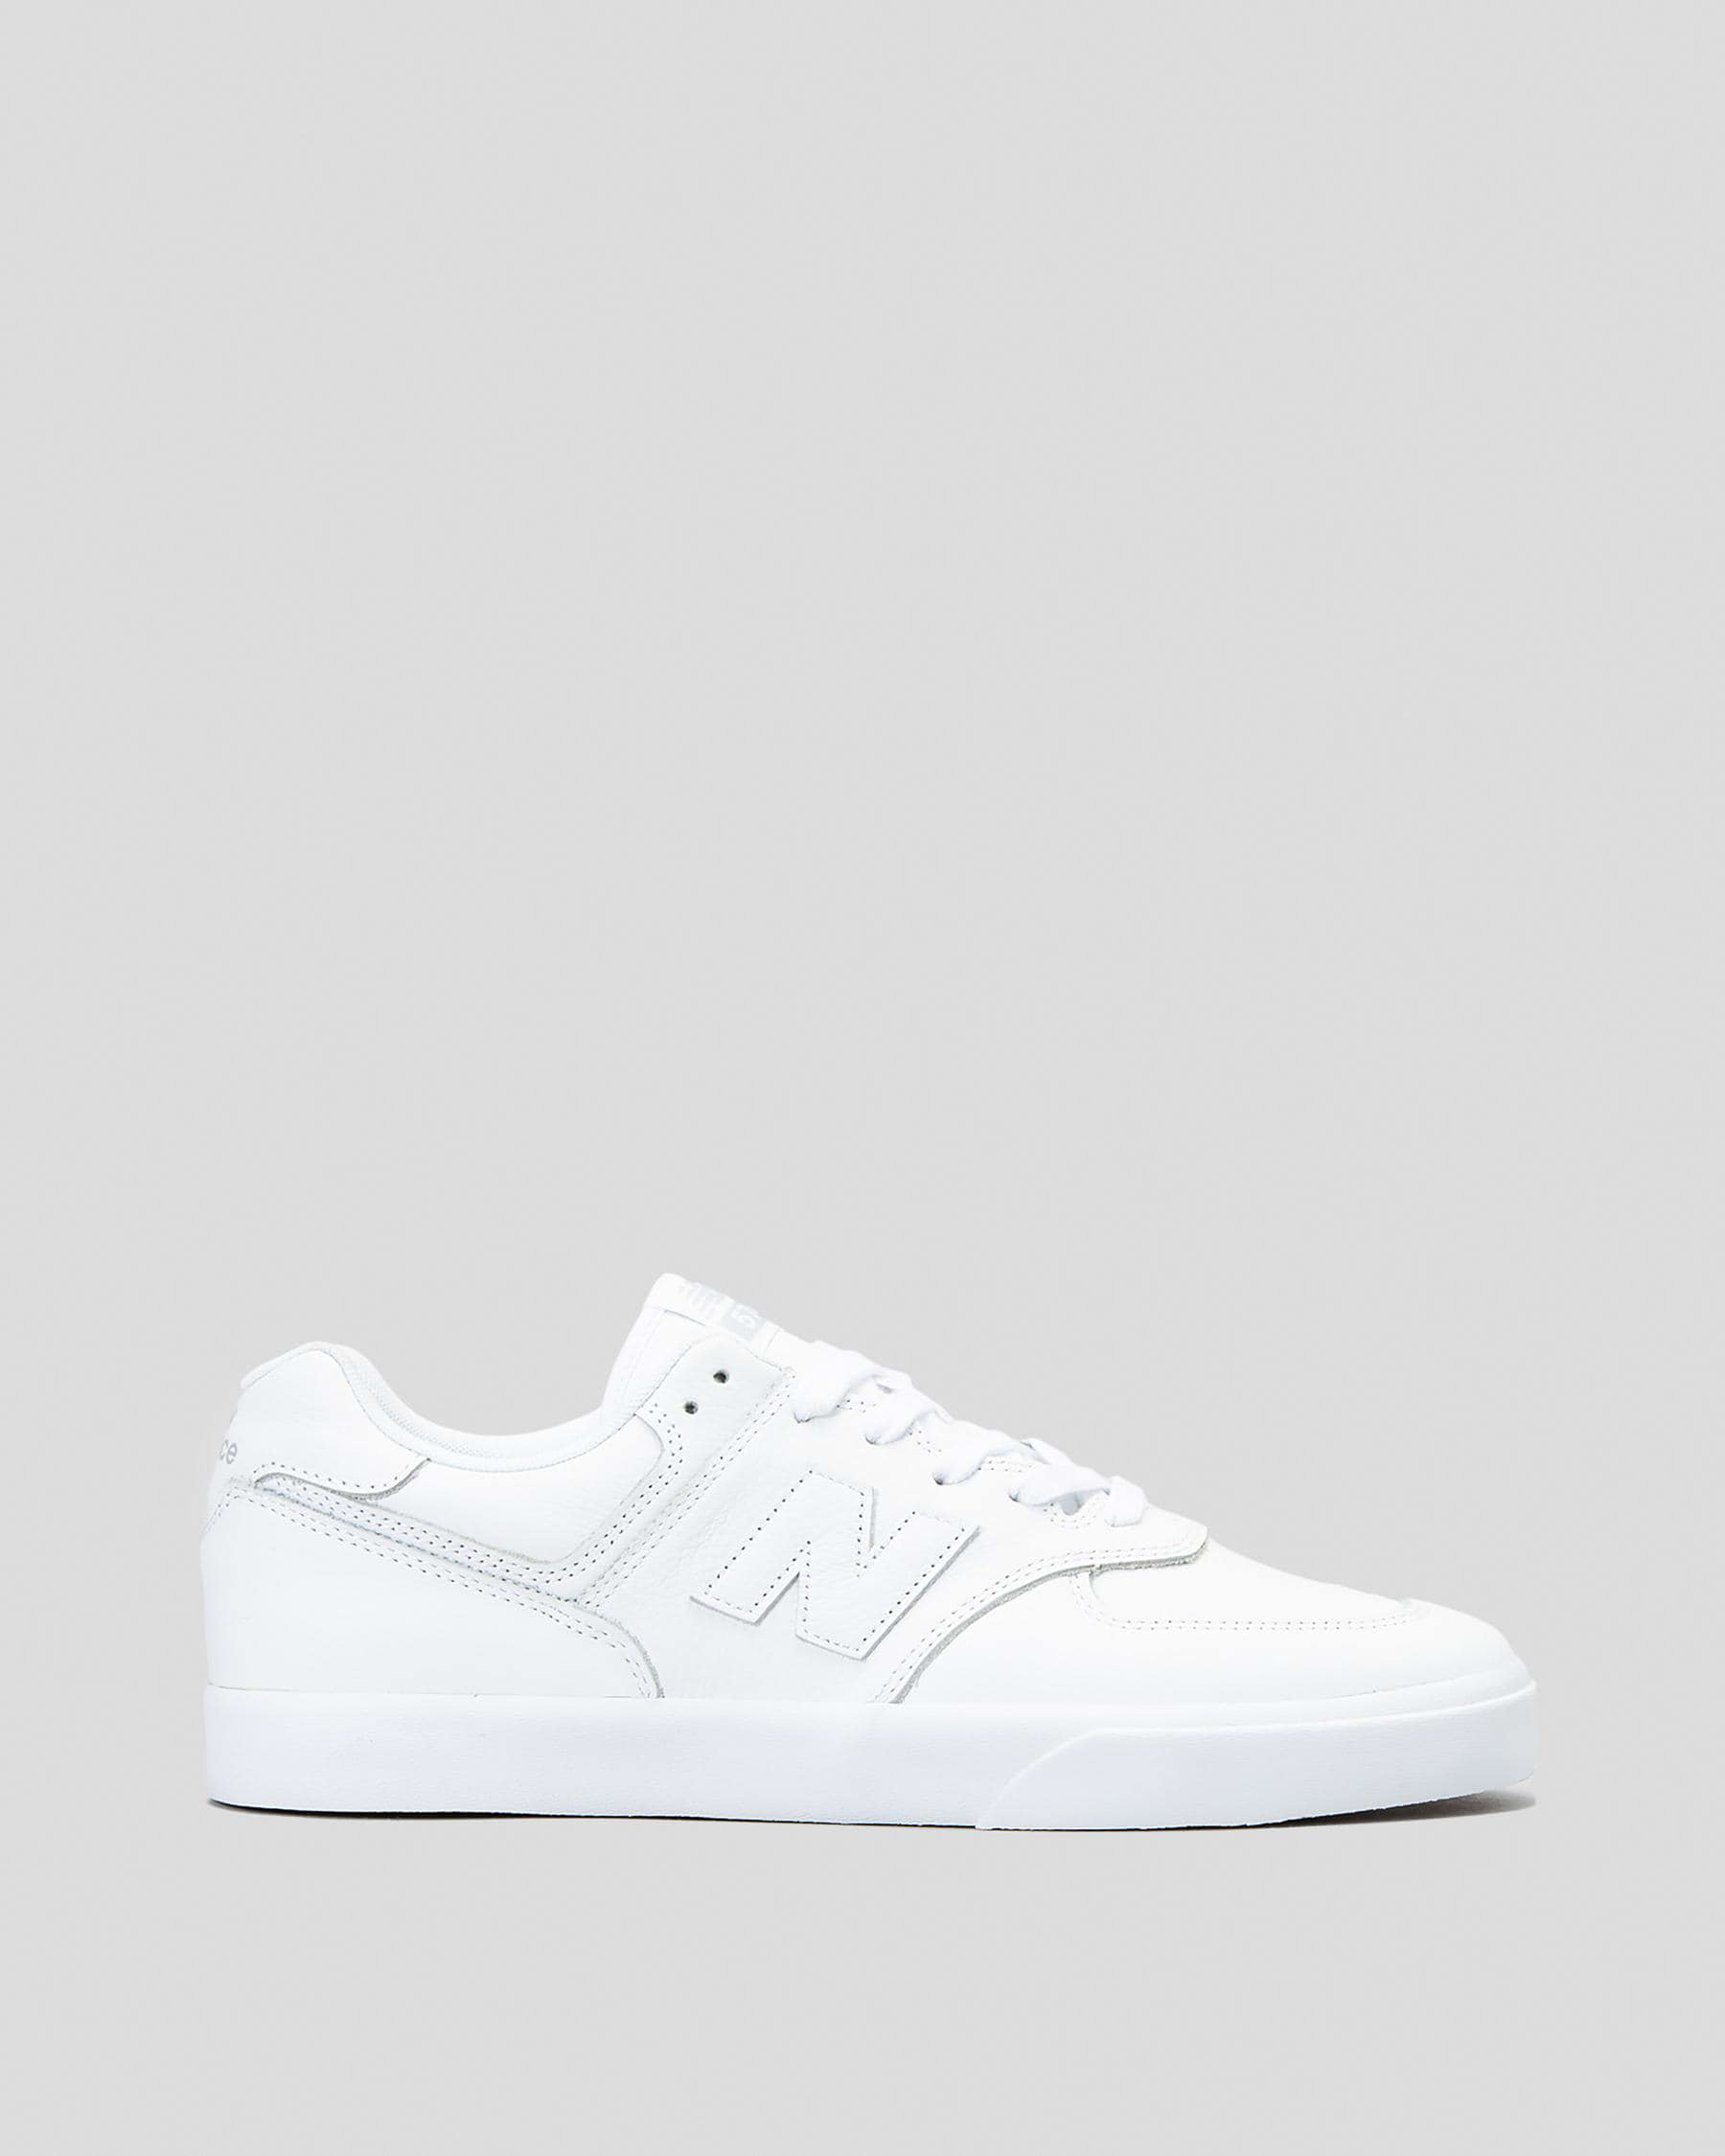 Shop New Balance NB 574 Shoes In White/white - Fast Shipping & Easy ...